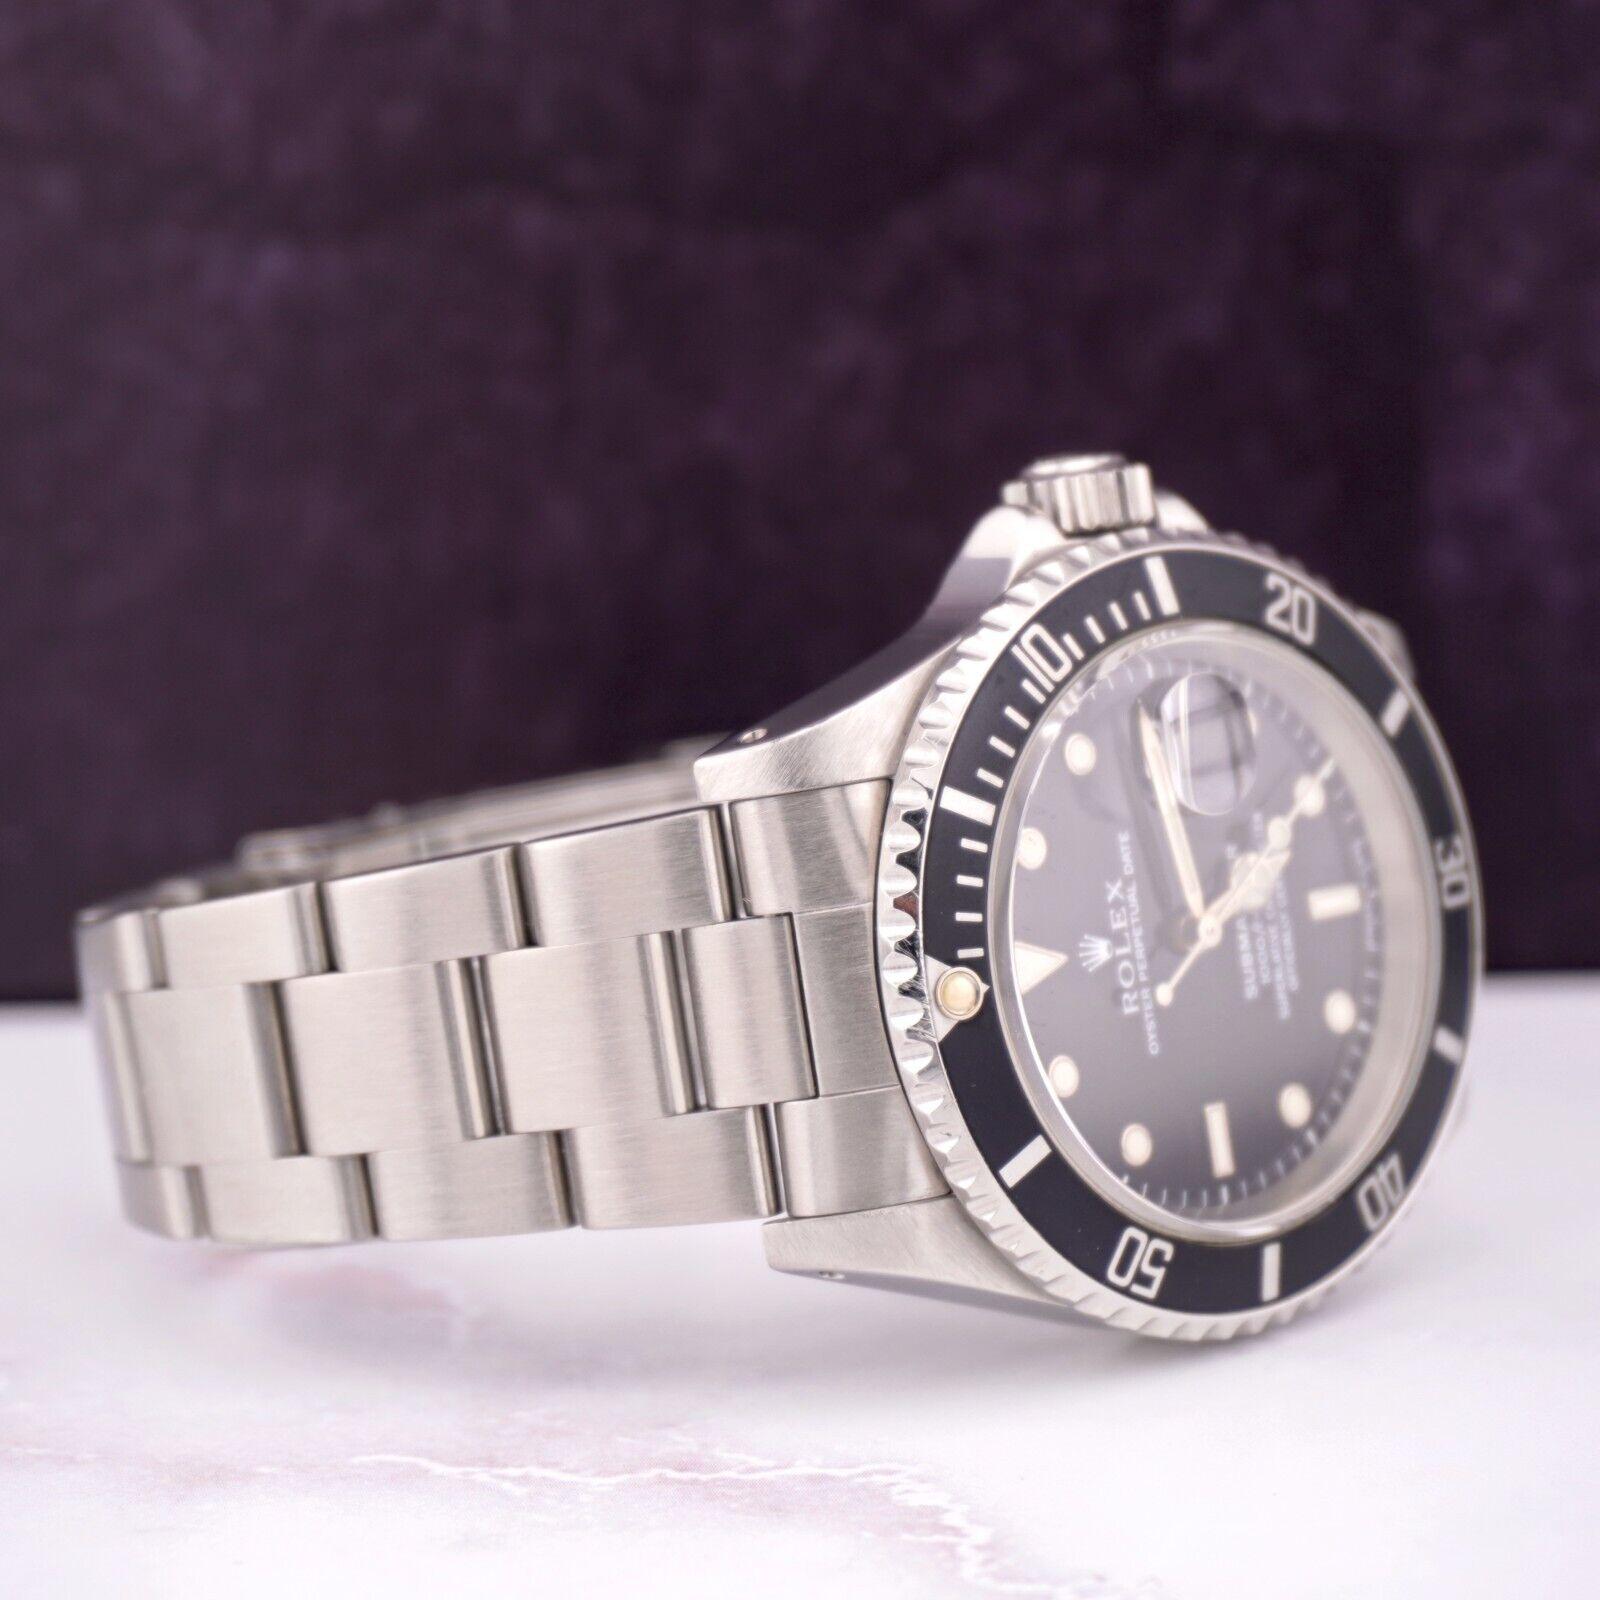 Rolex Submariner Date 40mm Watch. A Pre-owned watch w/ Gift Box. Watch is 100% Authentic and Comes with Authenticity Card. Watch Reference is 16610 and is in Great Condition (See Pictures). The dial color is Black and material is Stainless Steel.